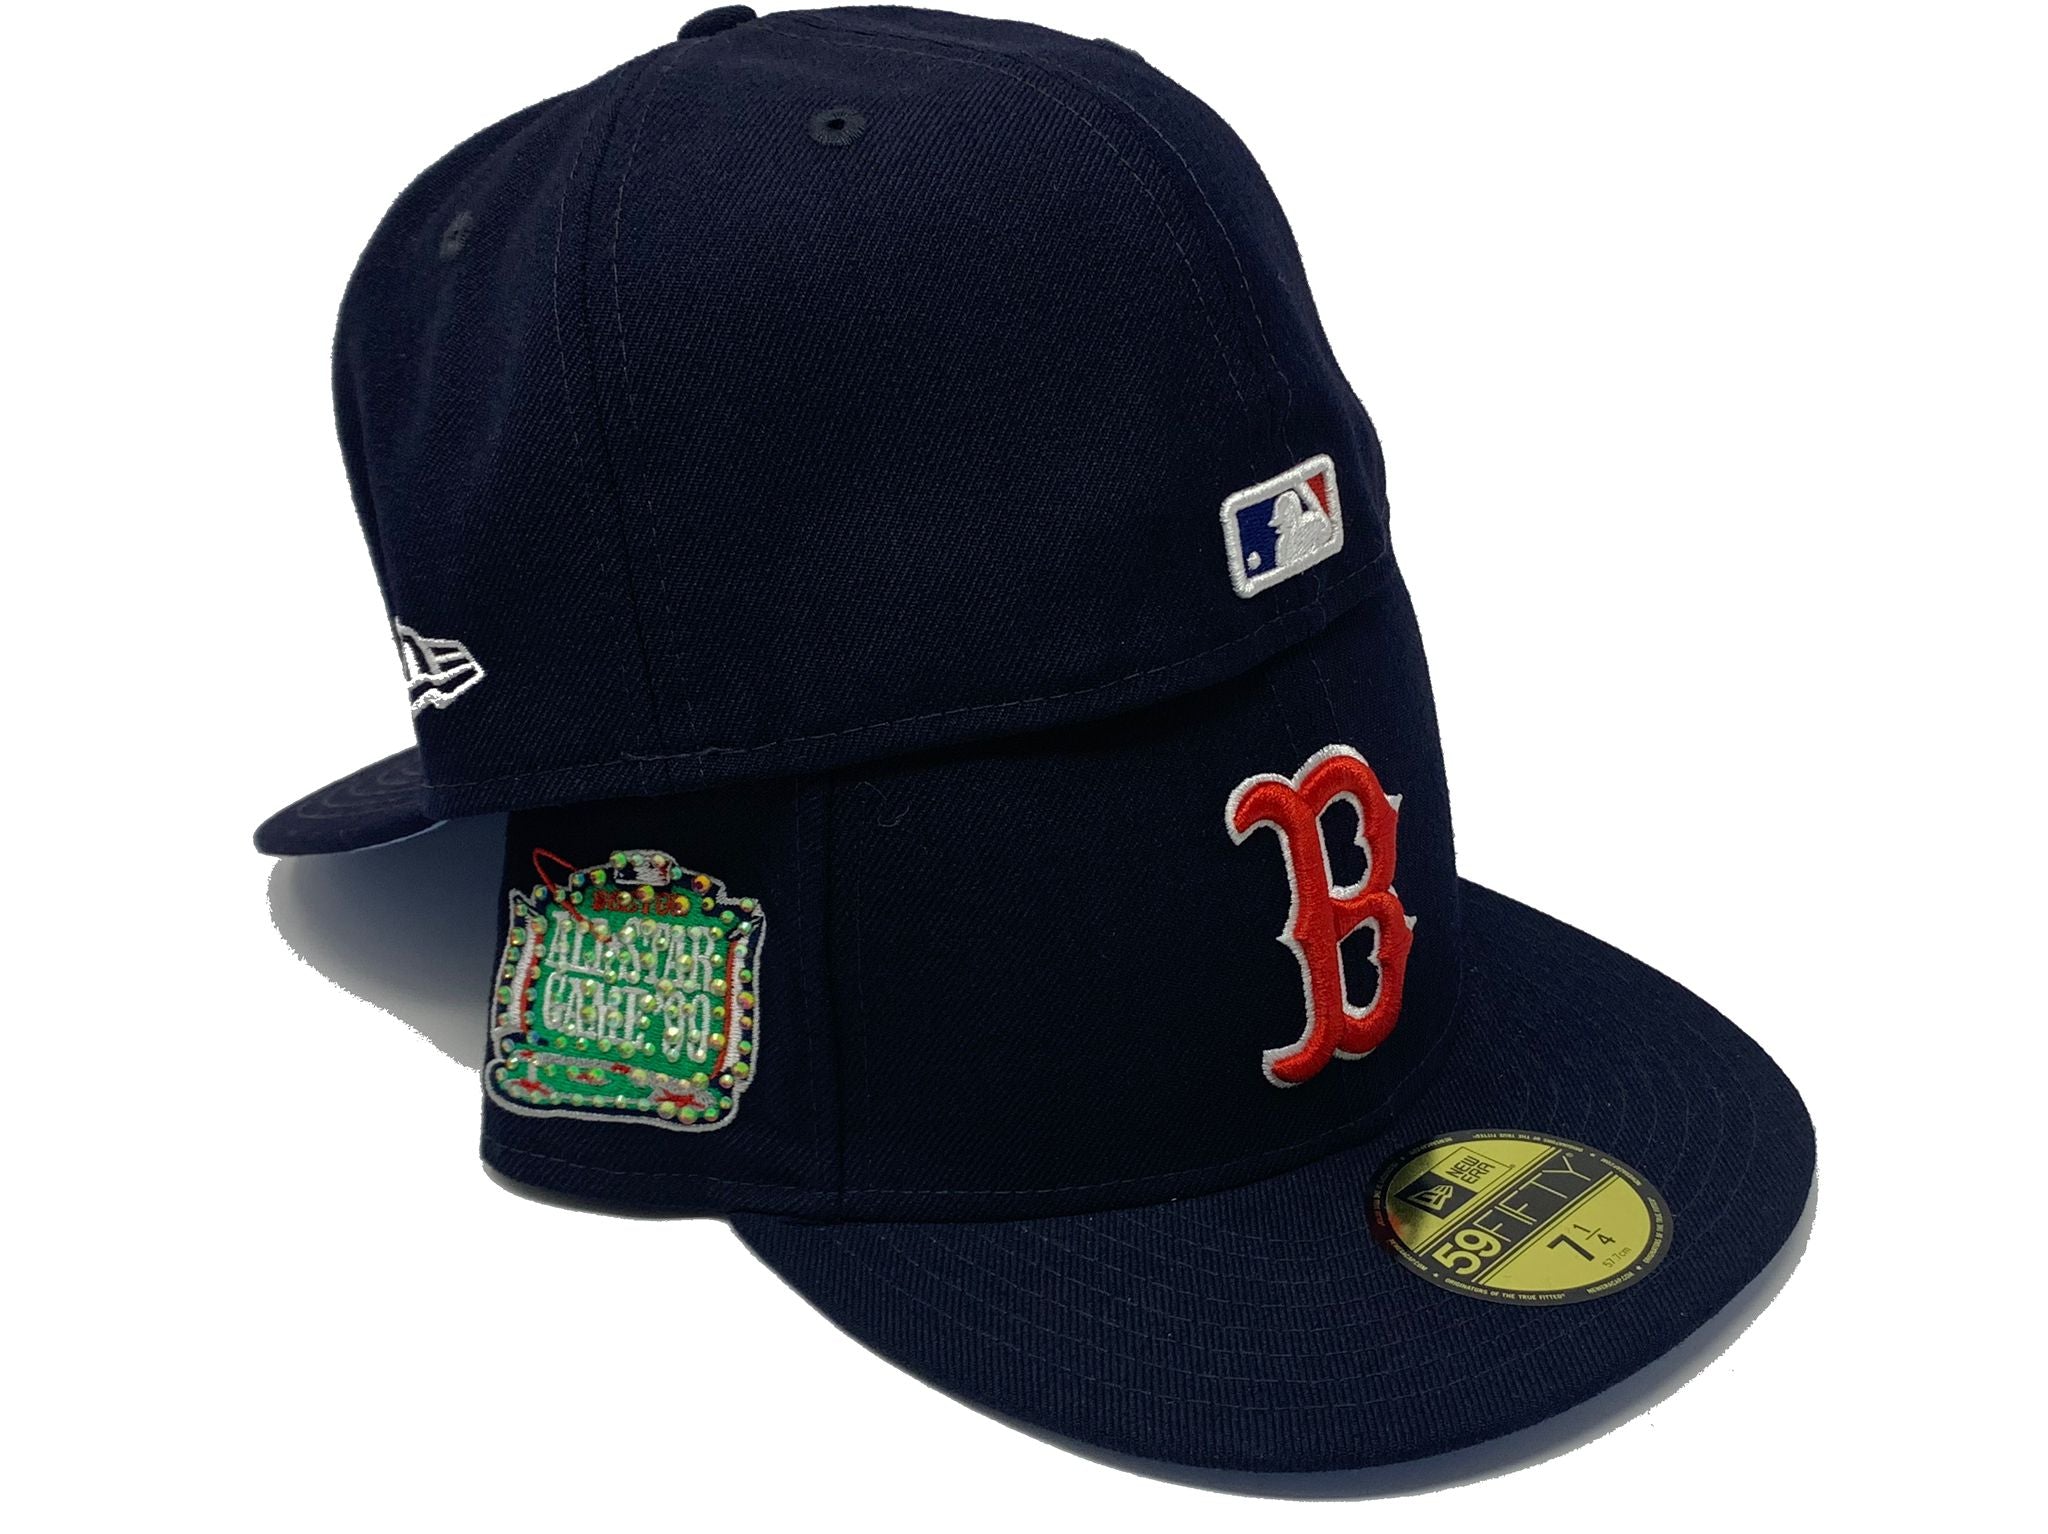 Boston Red Sox 1999 All-Star Game Cap